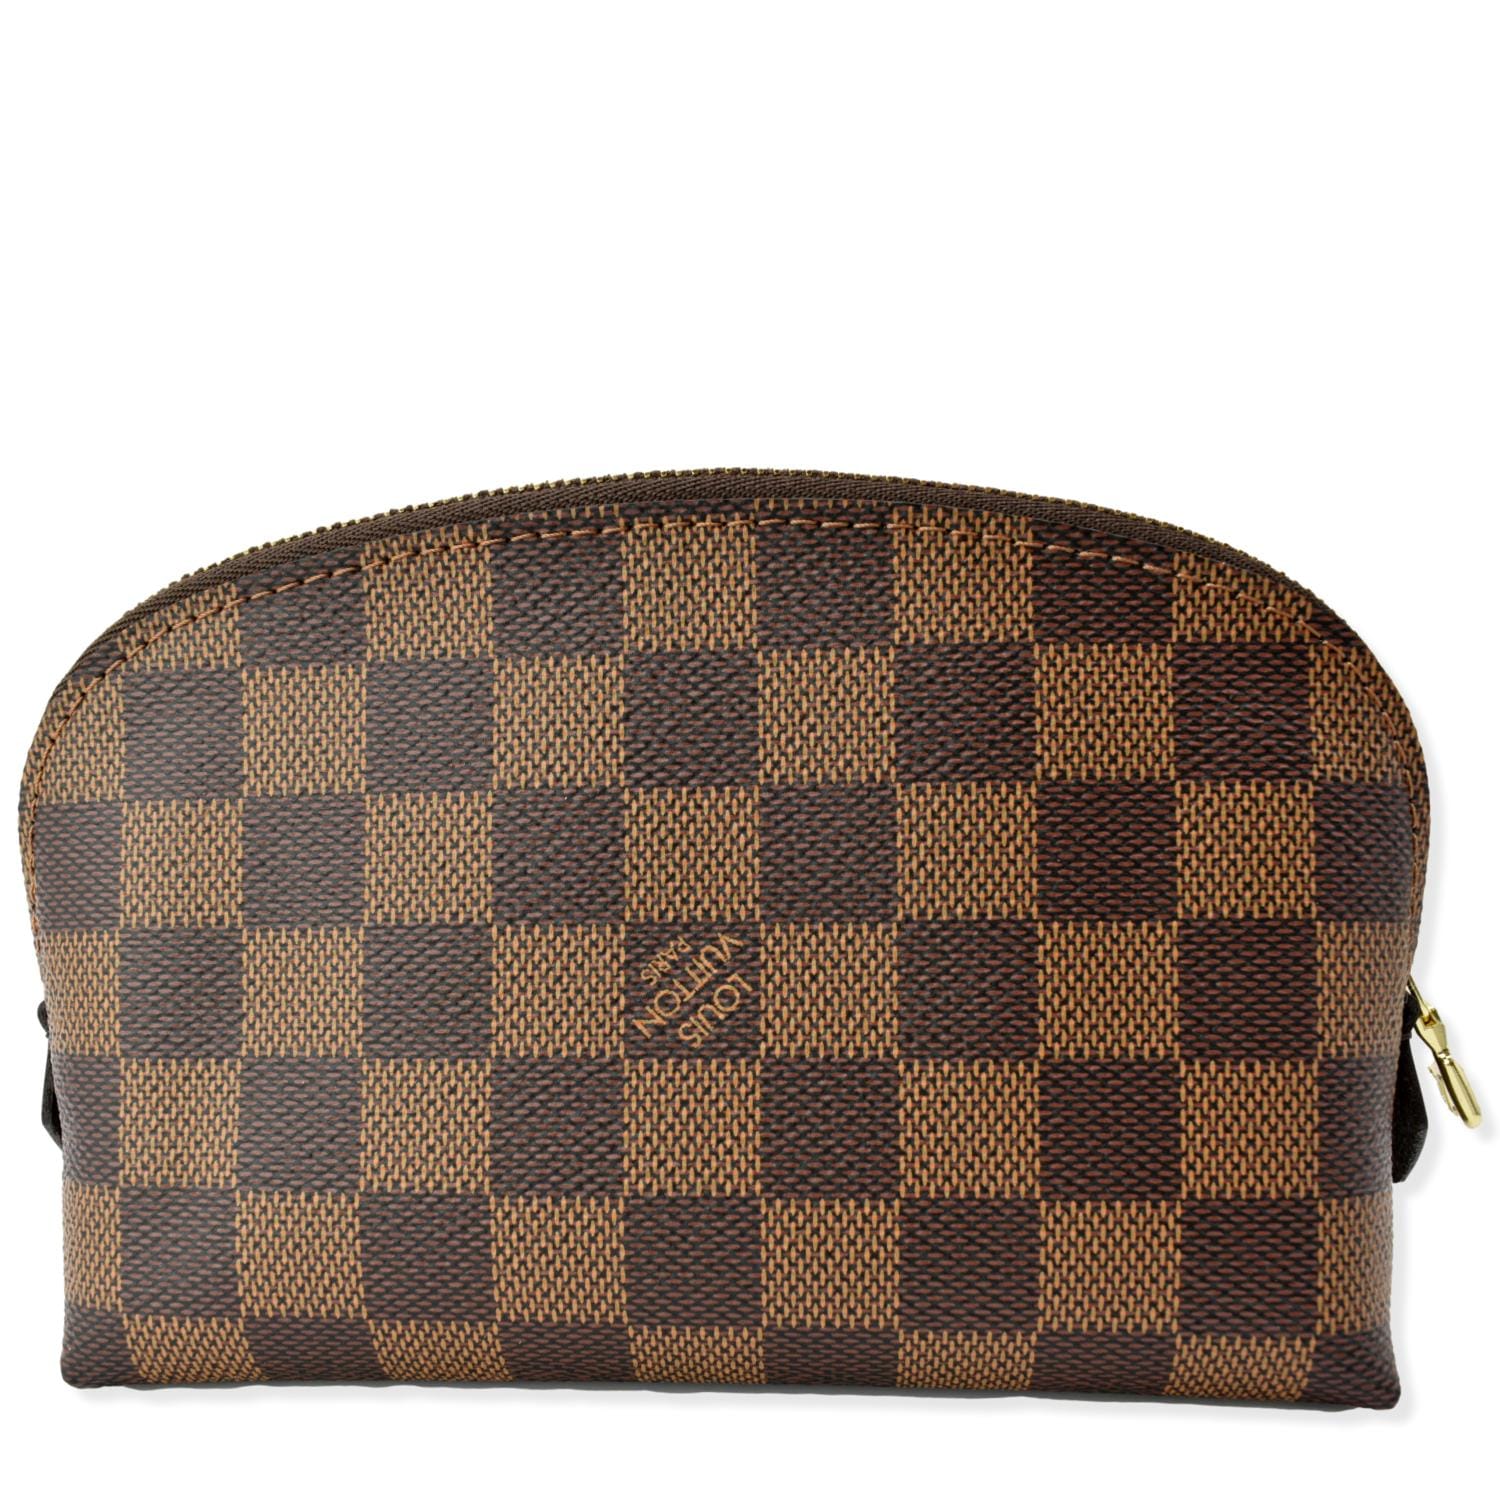 Louis Vuitton Cosmetic Pouch PM in Damier Ebene - New*